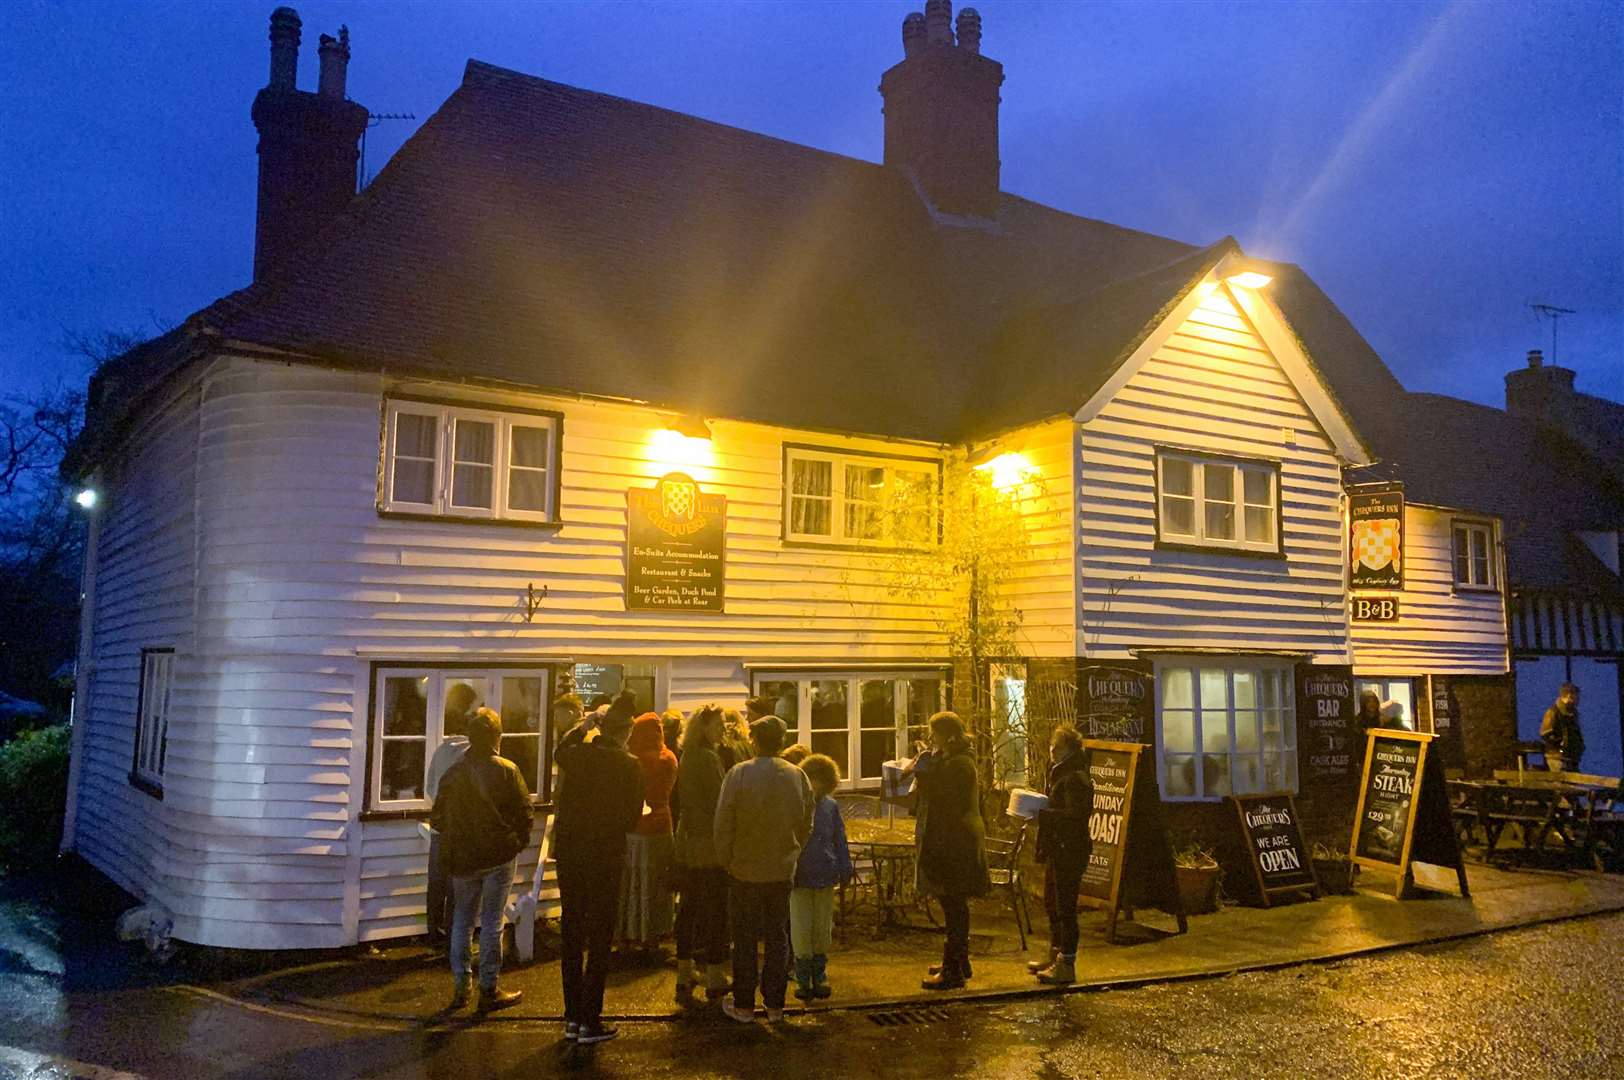 People crammed into the pub to get a glimpse of Paul who was searching for the village star baker